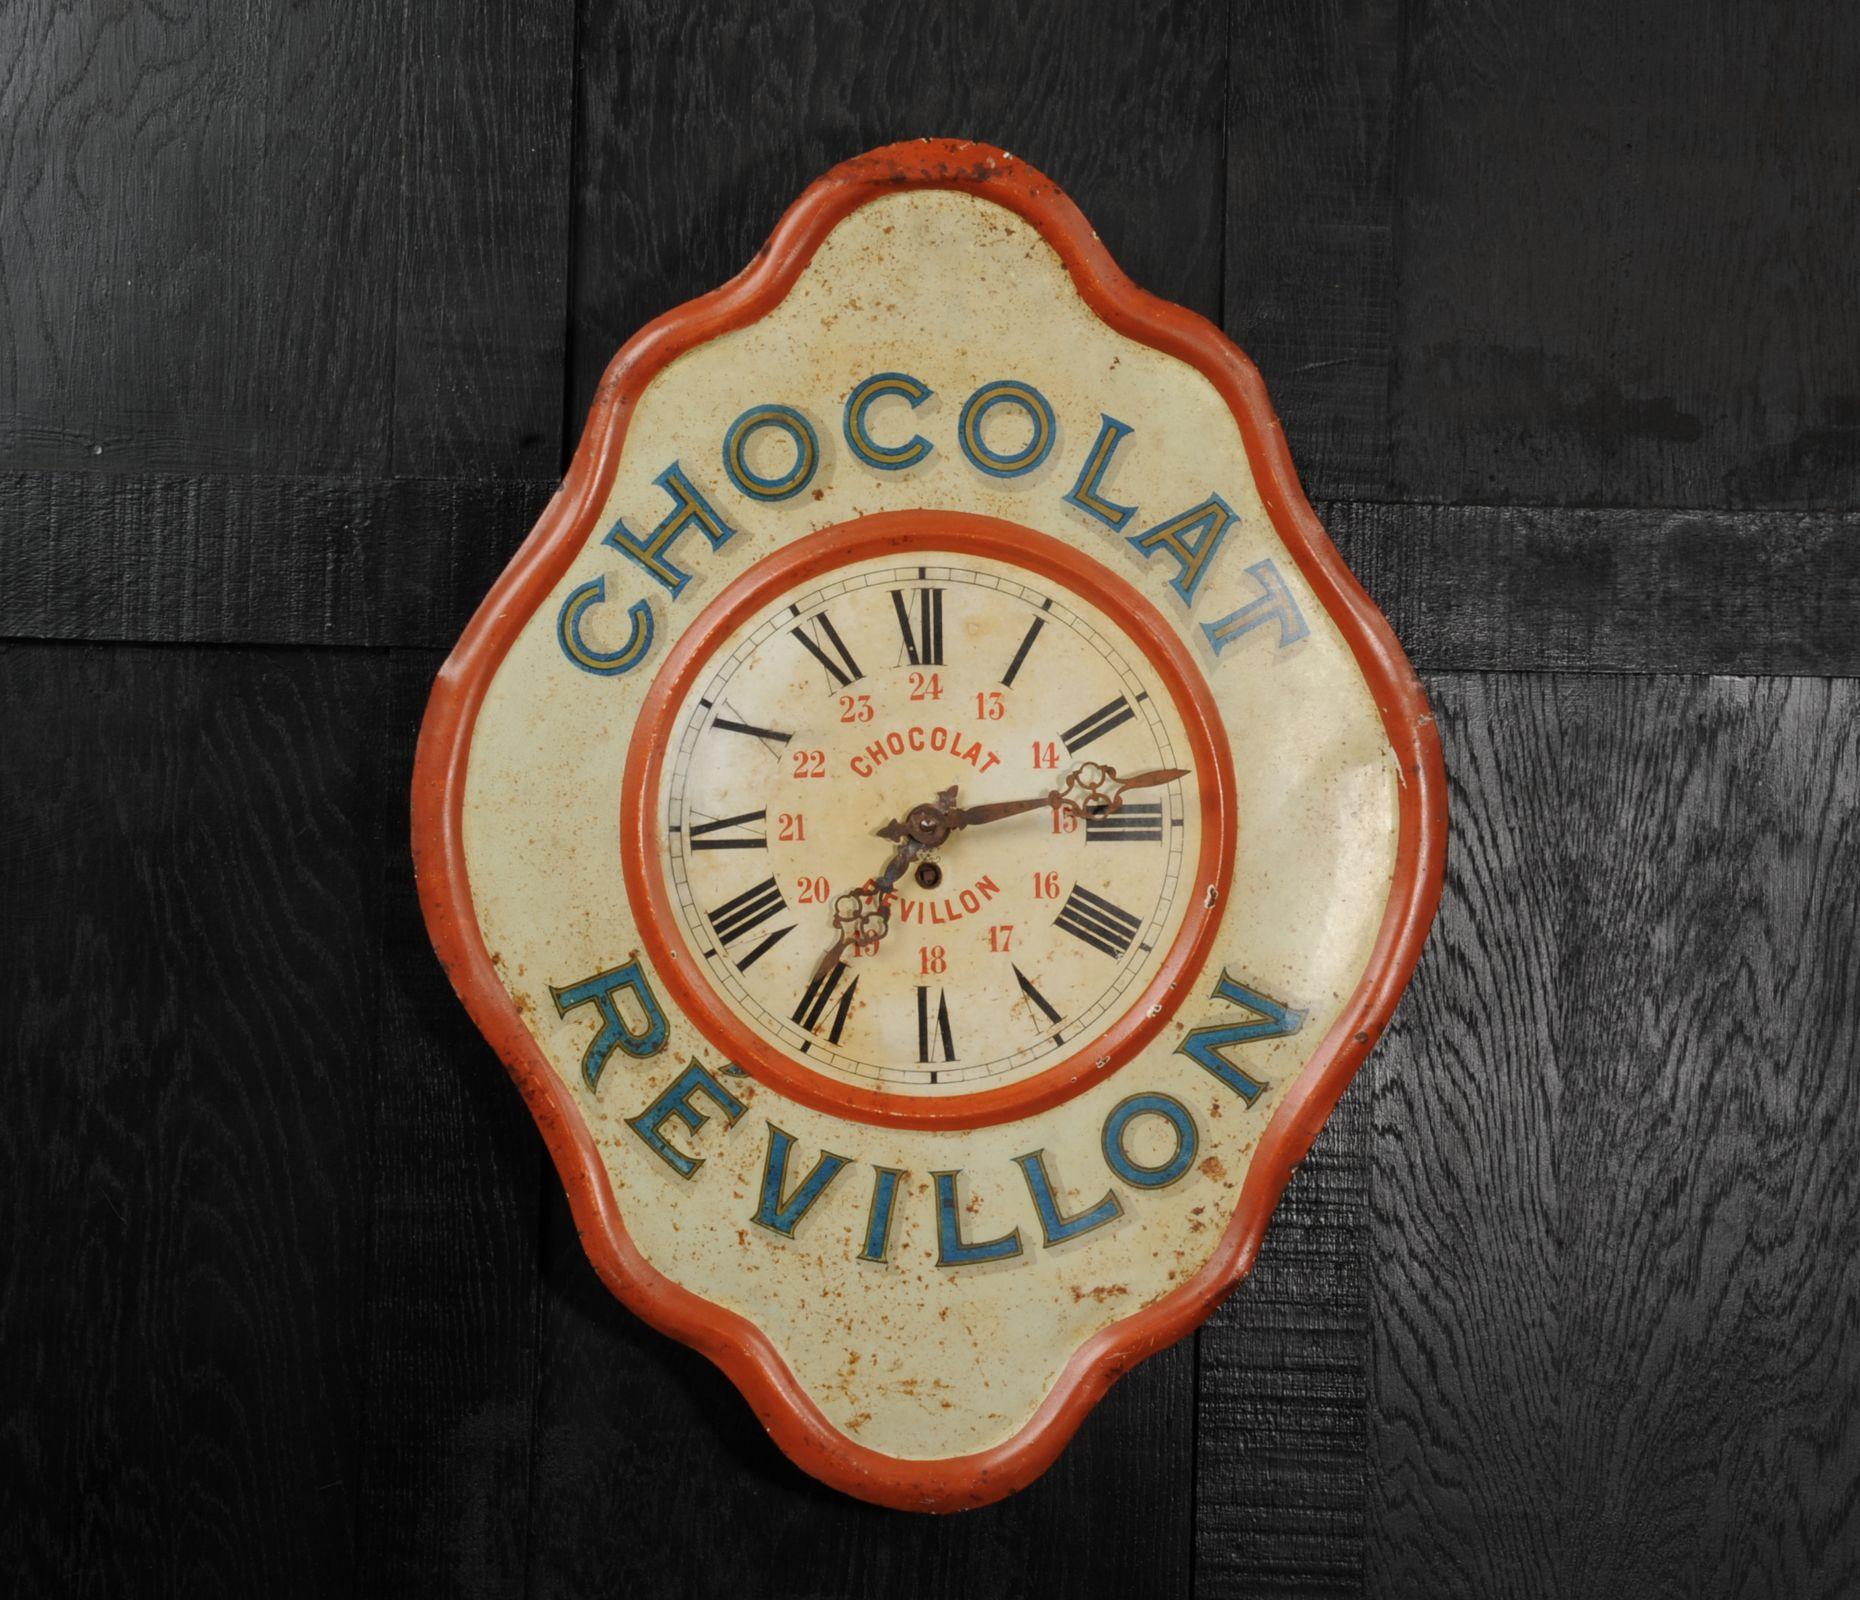 A wonderful original Révillon Chocolatier tole advertising clock, circa 1920. Found by our buyer in a long derelict French bar it has been worn by years of neglect with a wonderful ancient craquelure and a patina of paint loss and rust. The fine